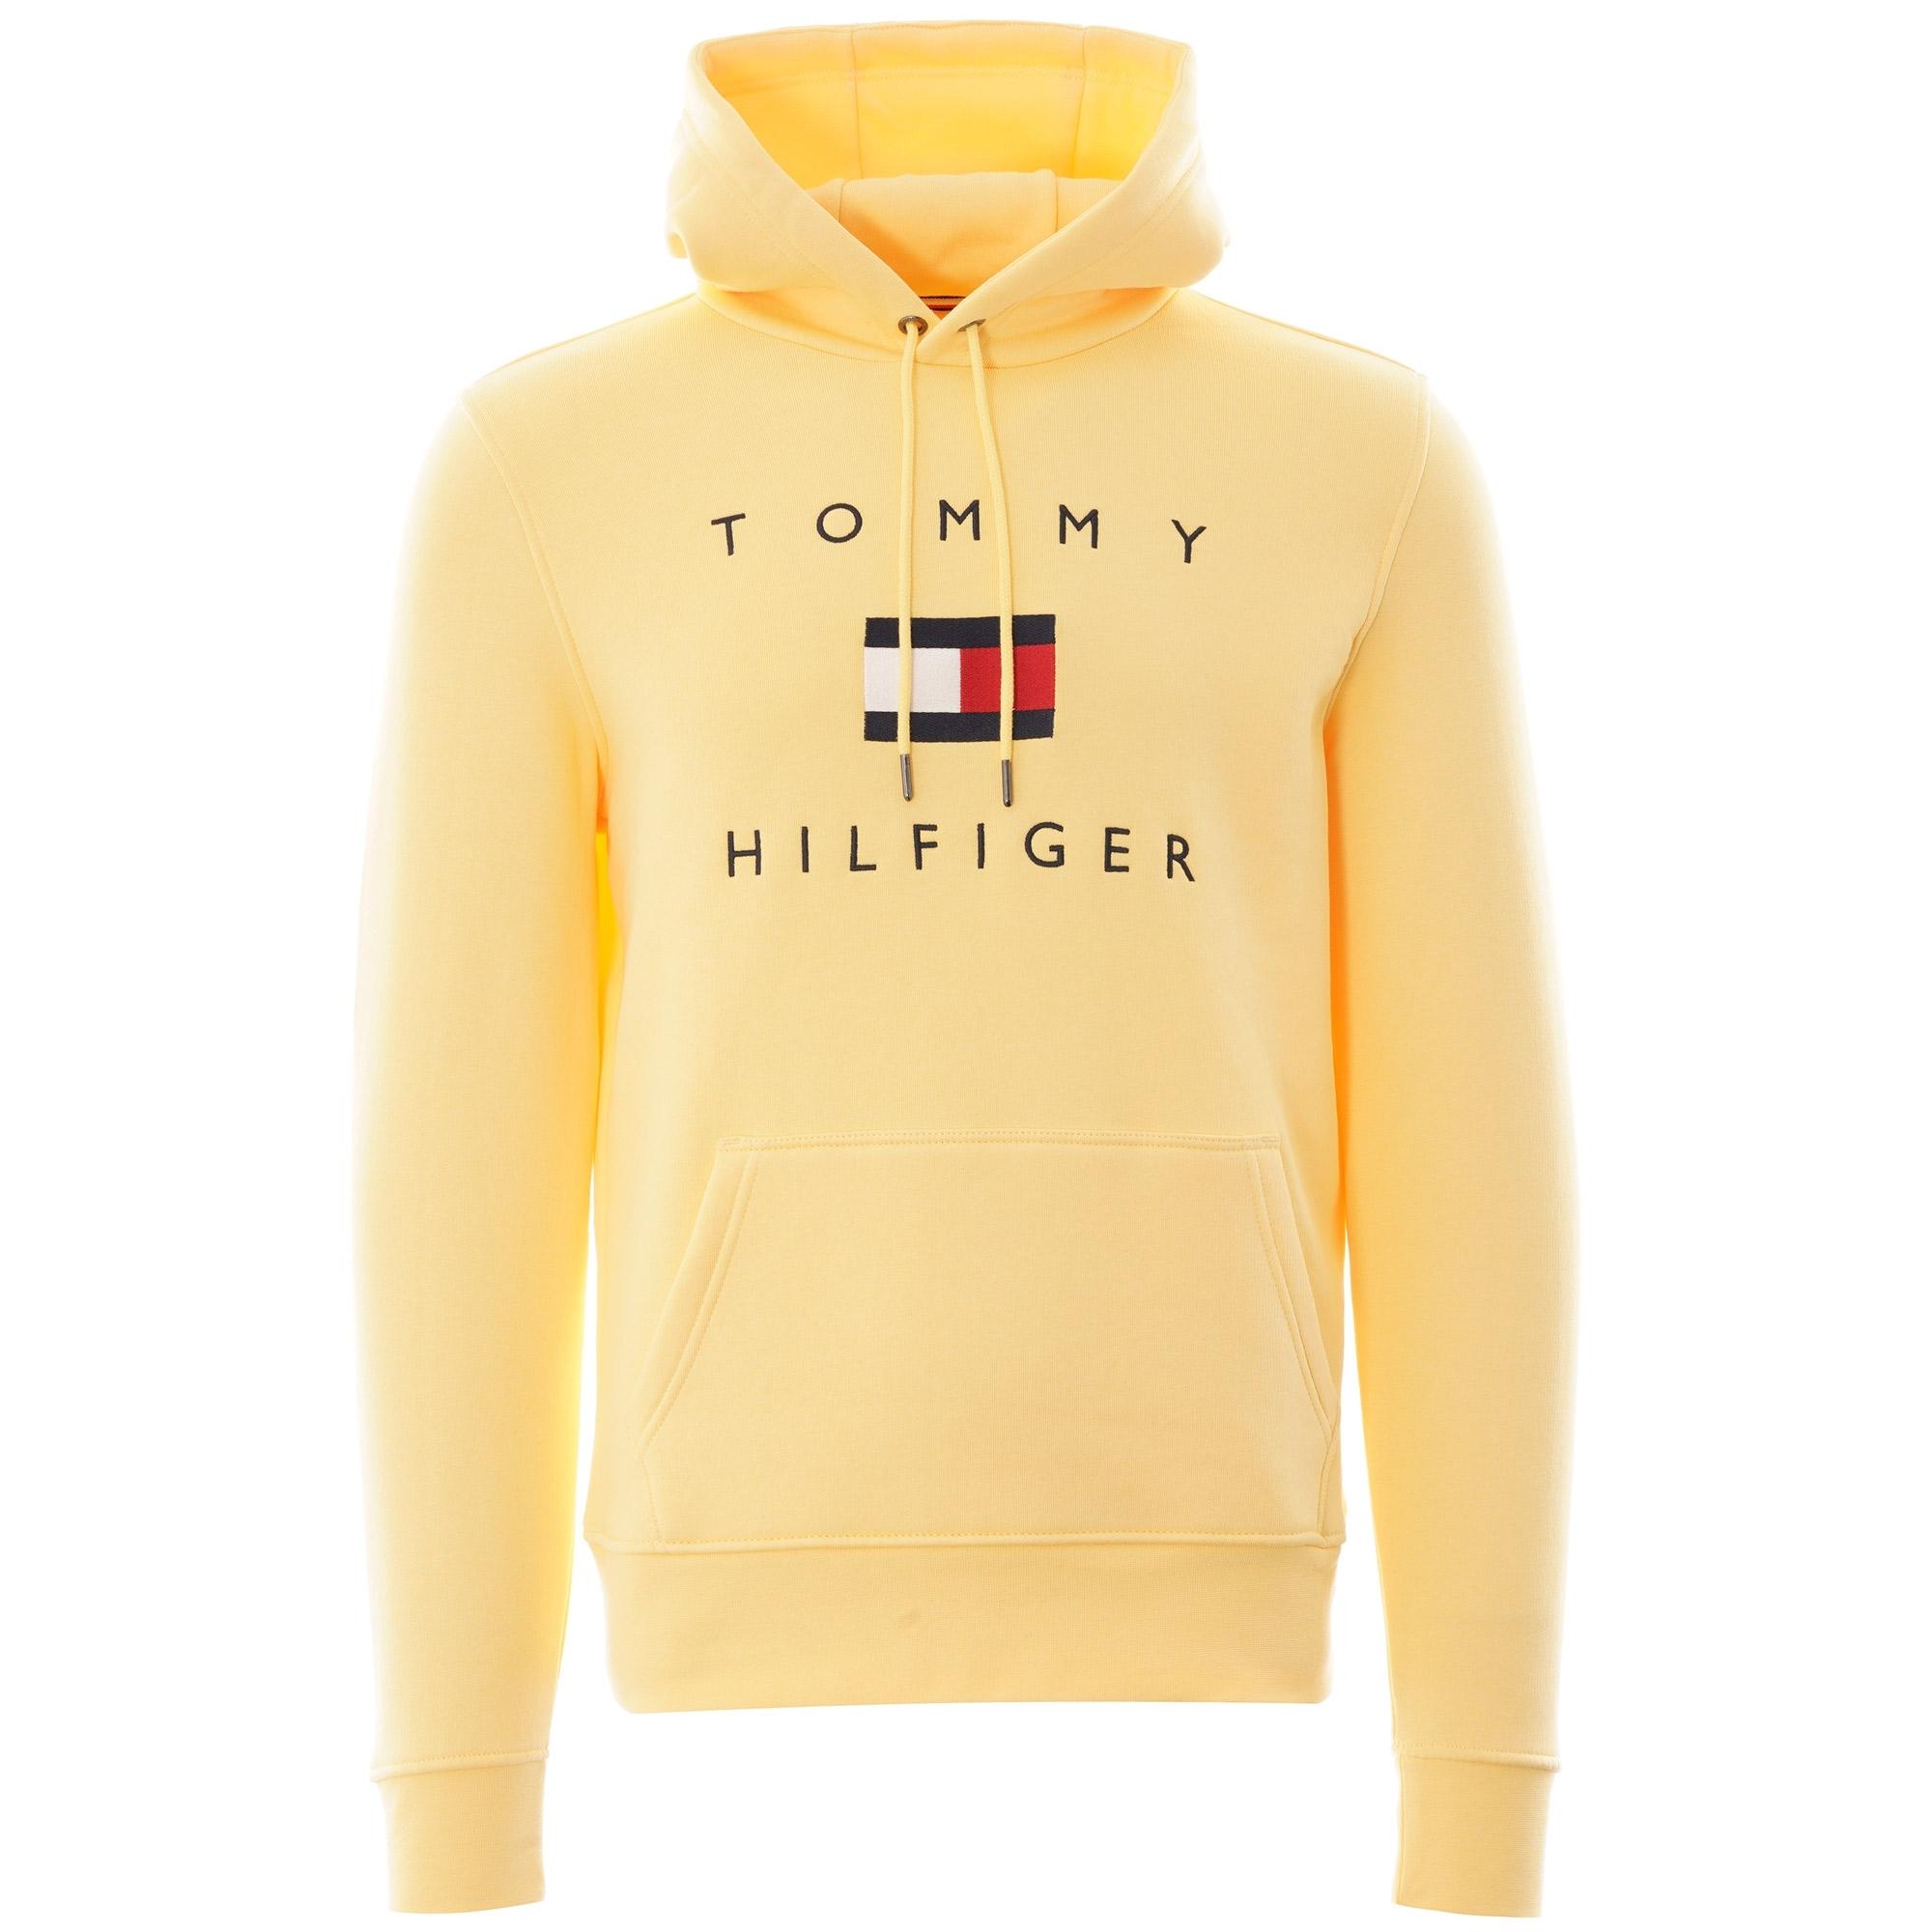 Tommy Hilfiger Cotton Flag Hoodie in Yellow for Men - Lyst